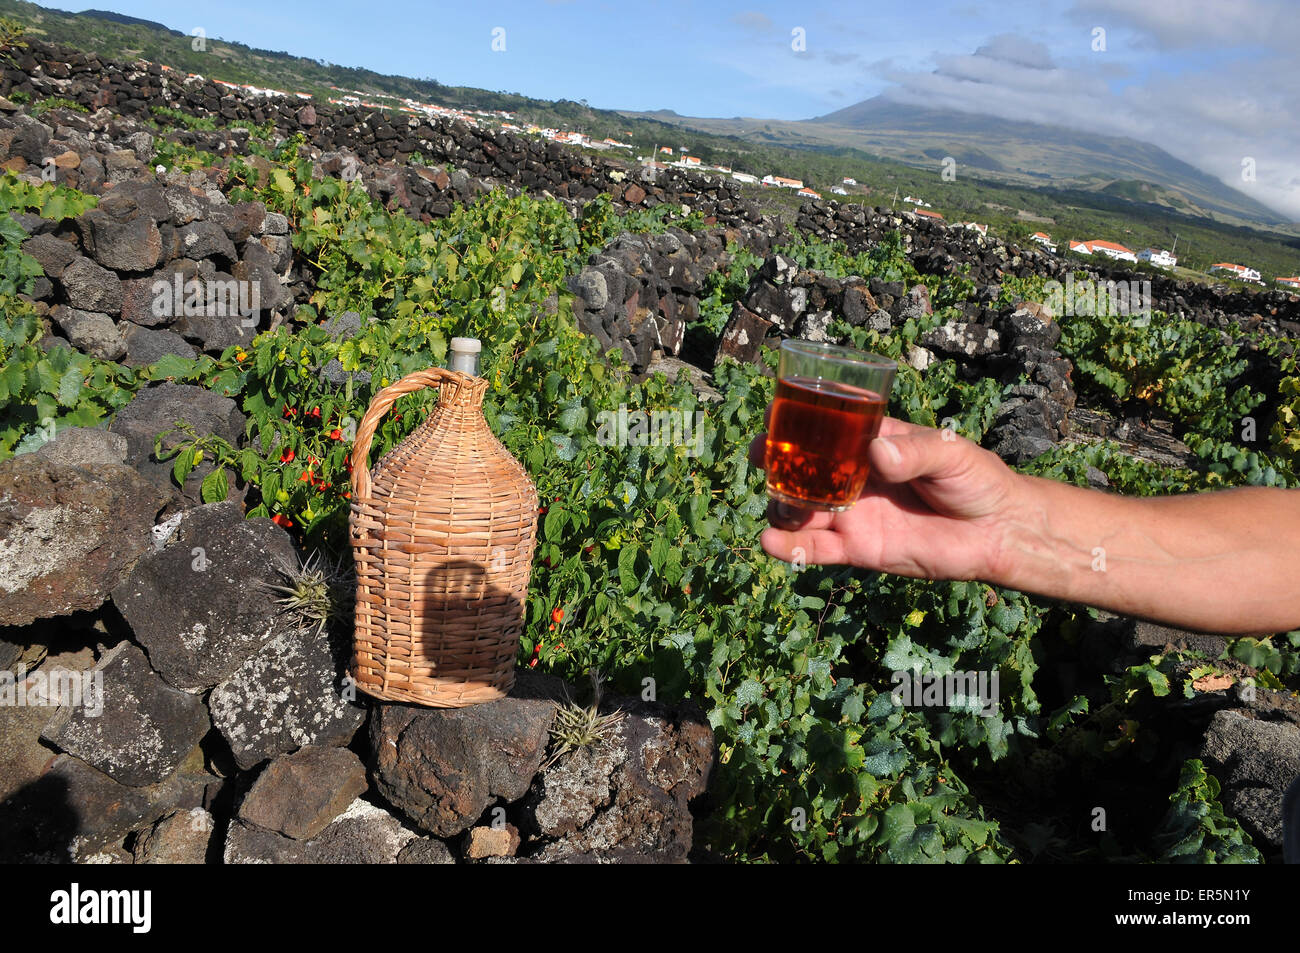 Viniculture at the southwest coast with Pico vulcano in the background, Ponta do Pico, Island of Pico, Azores, Portugal Stock Photo